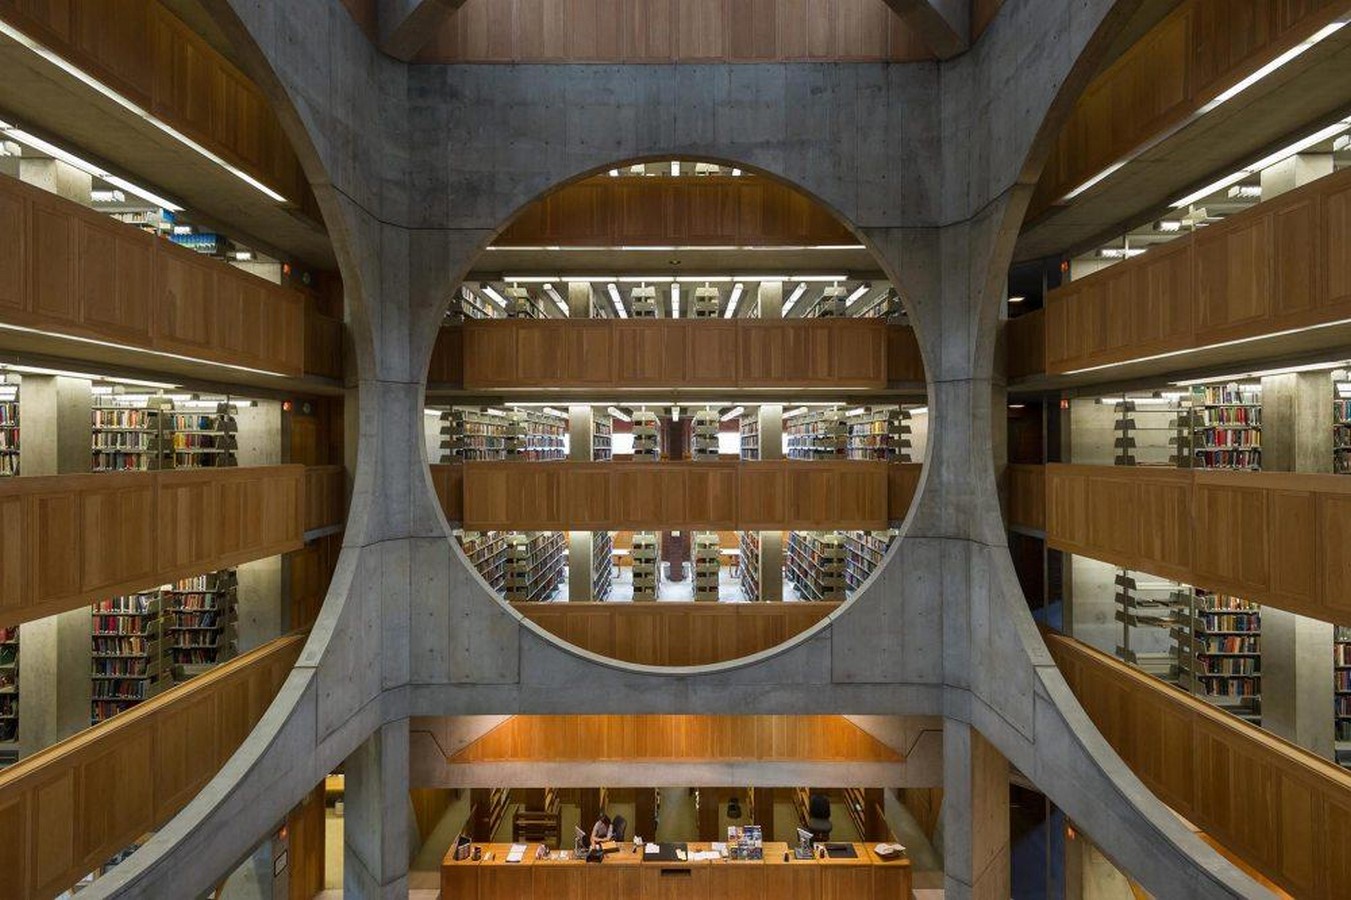 Philip Exeter Academy Library by Louis Kahn: The thoughtful making of spaces - Sheet2